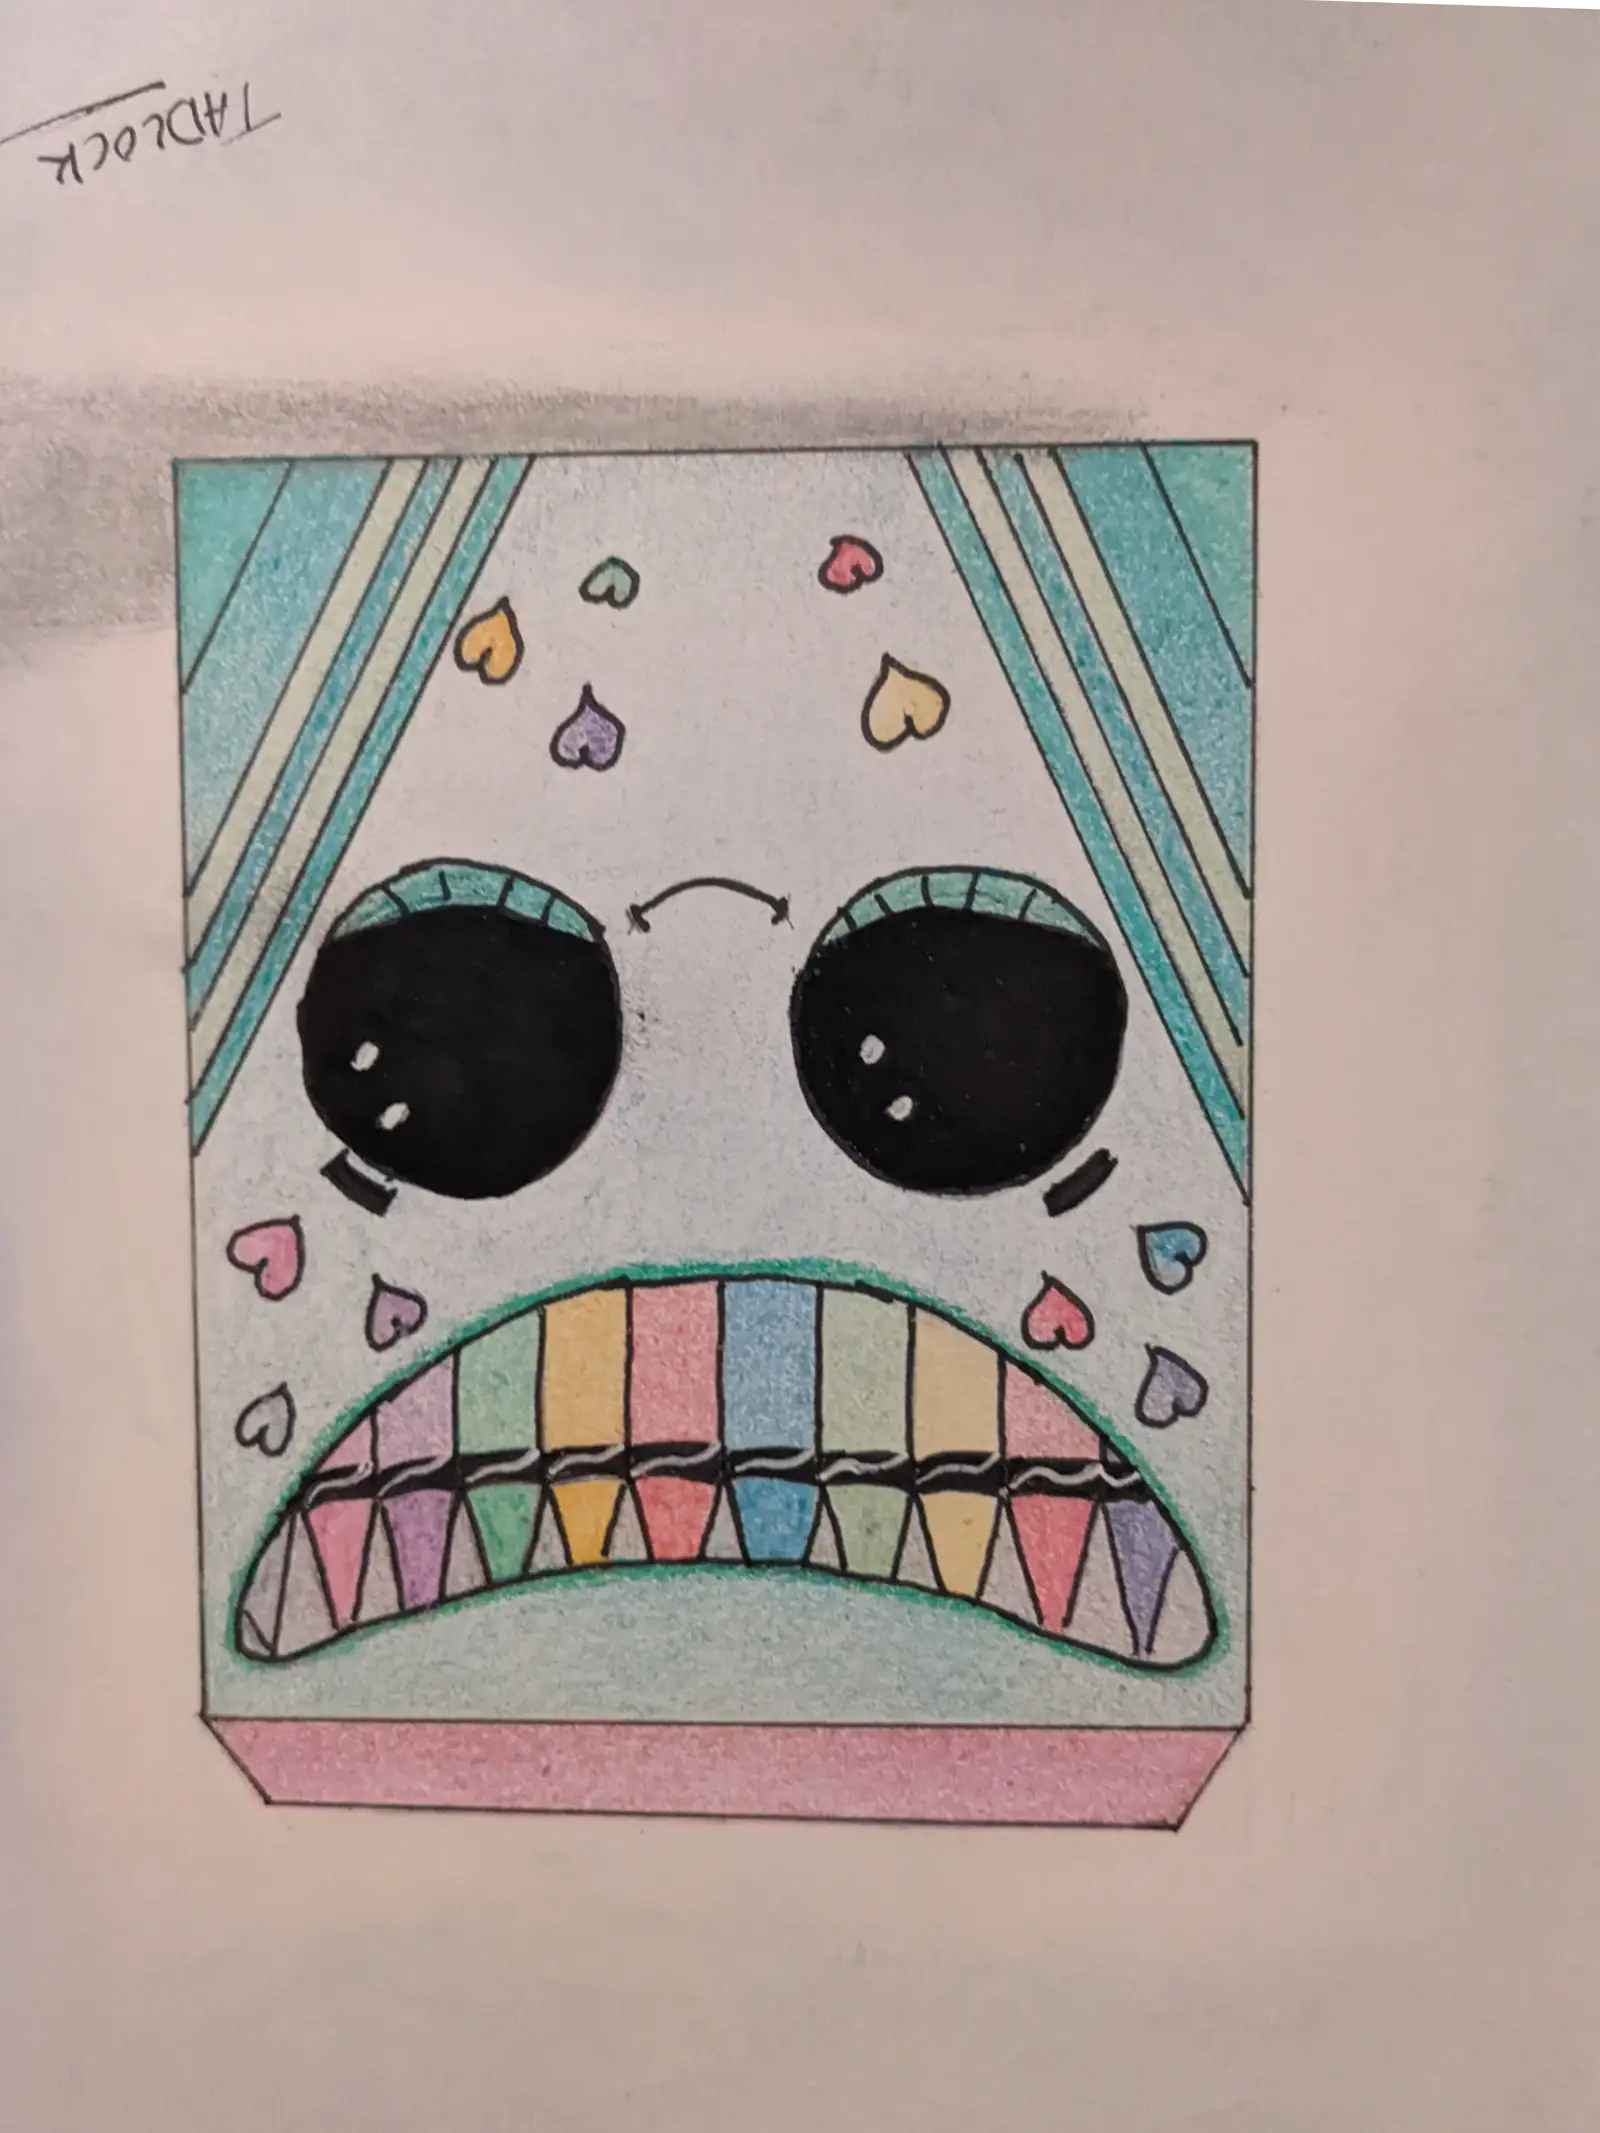 Upside down hand-drawn color crayon box with a face and hearts on the design. Fully colored.